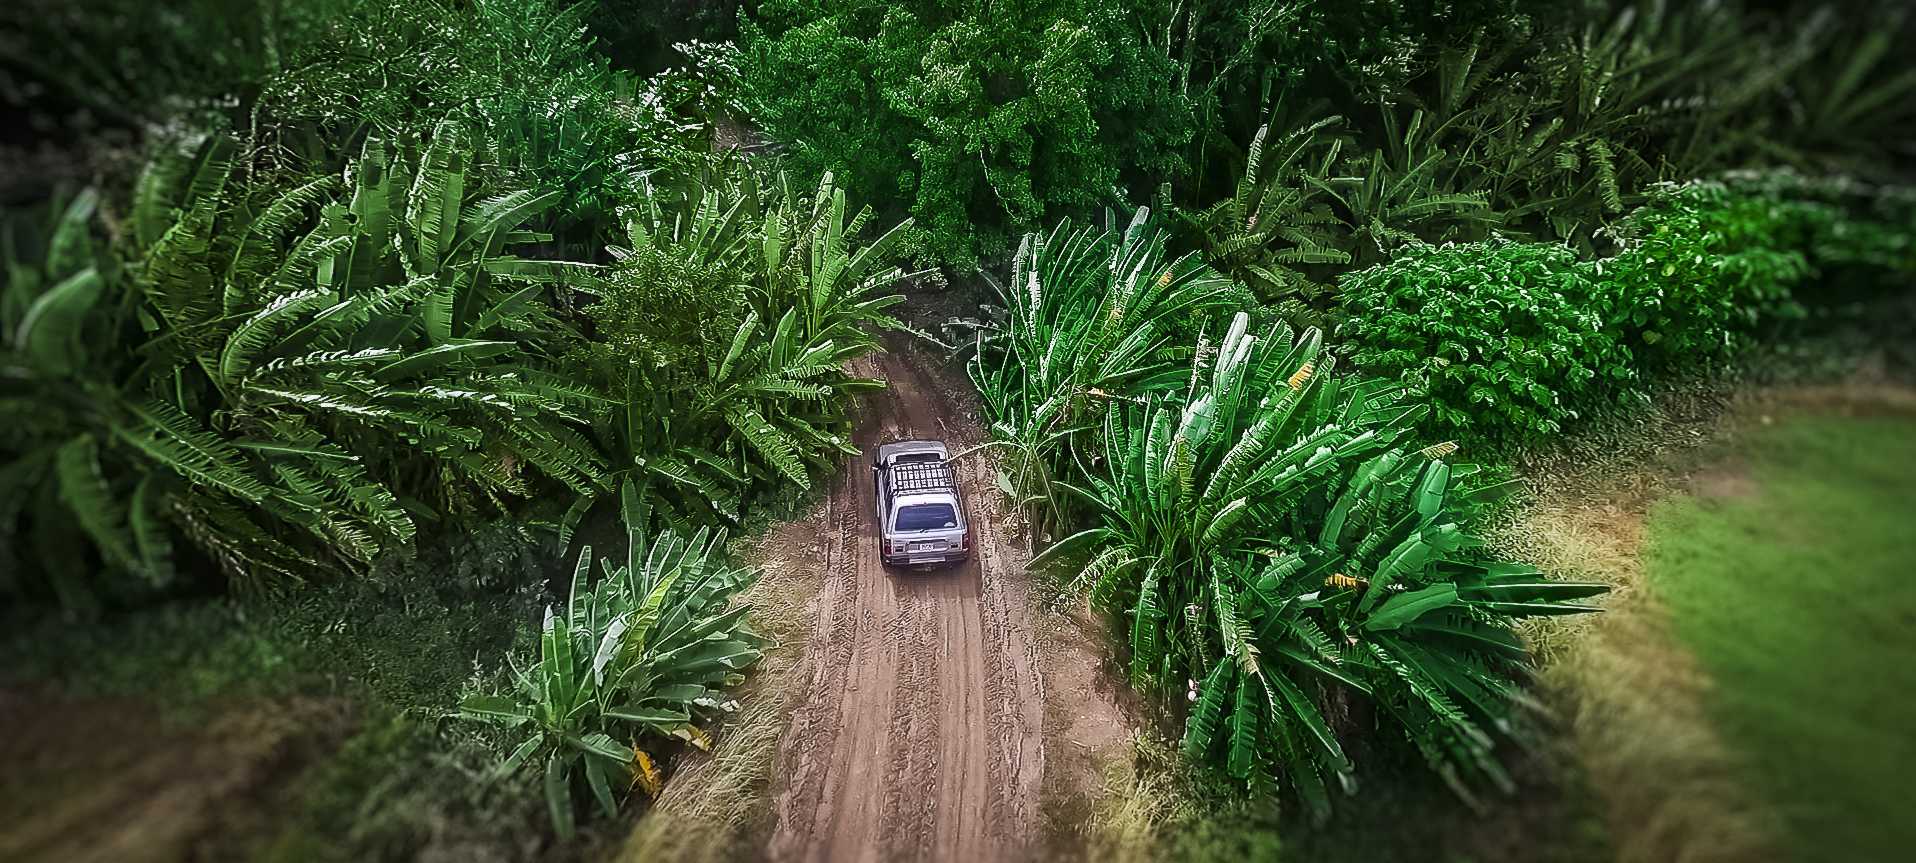 Serendipity Costa Rica 4x4 enters beach on little known track